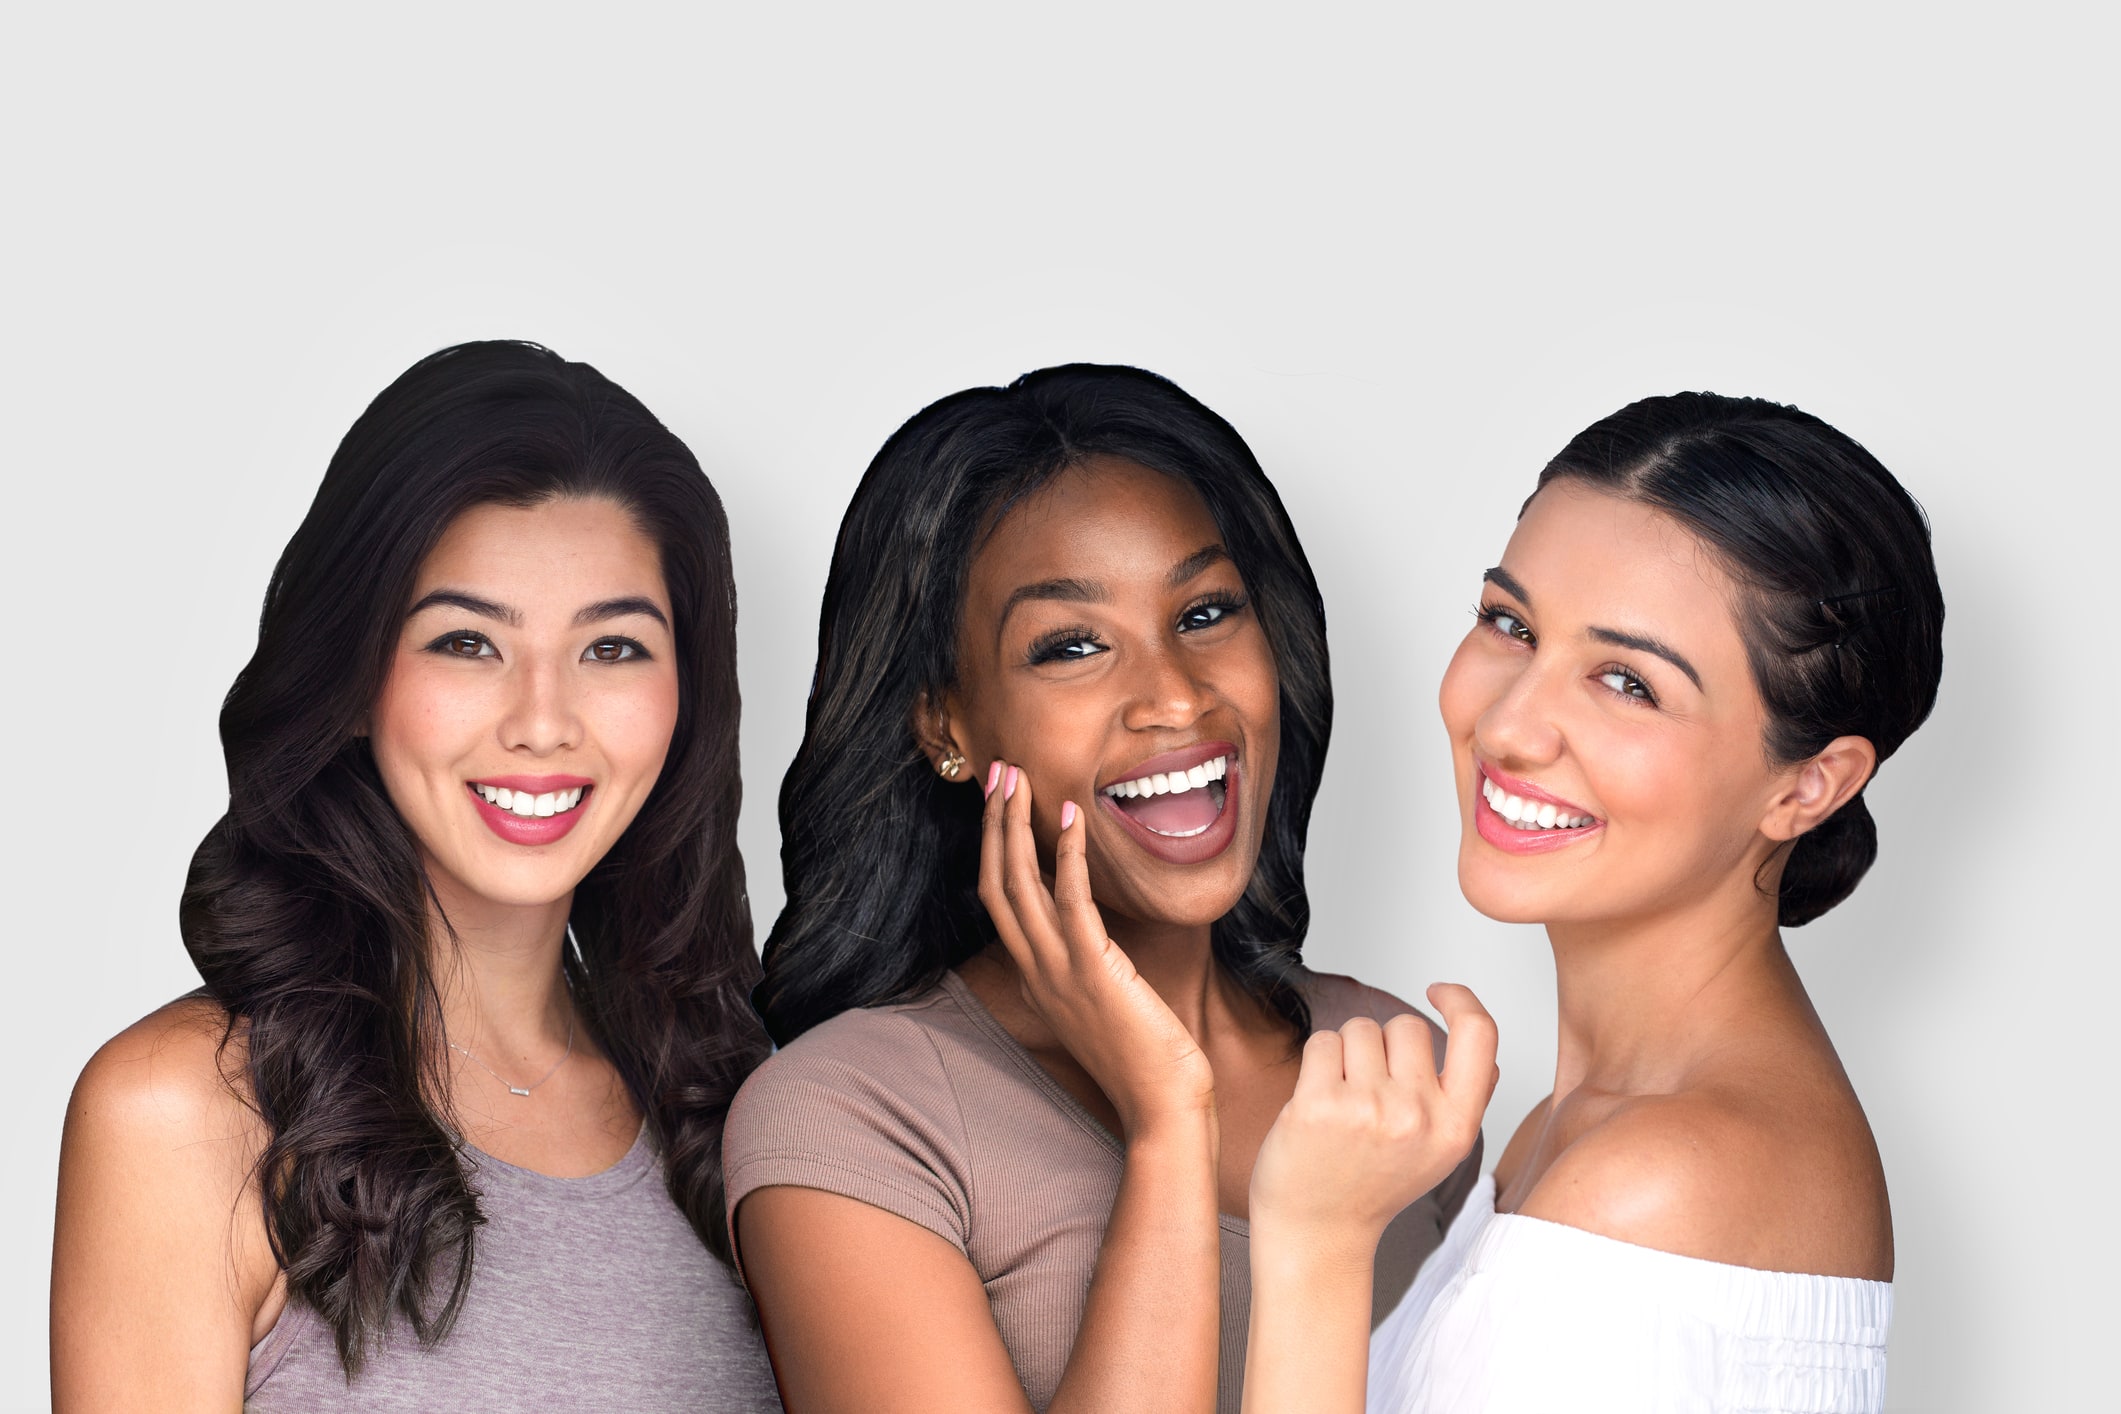 Multicultural women are driving growth in the beauty product industry.